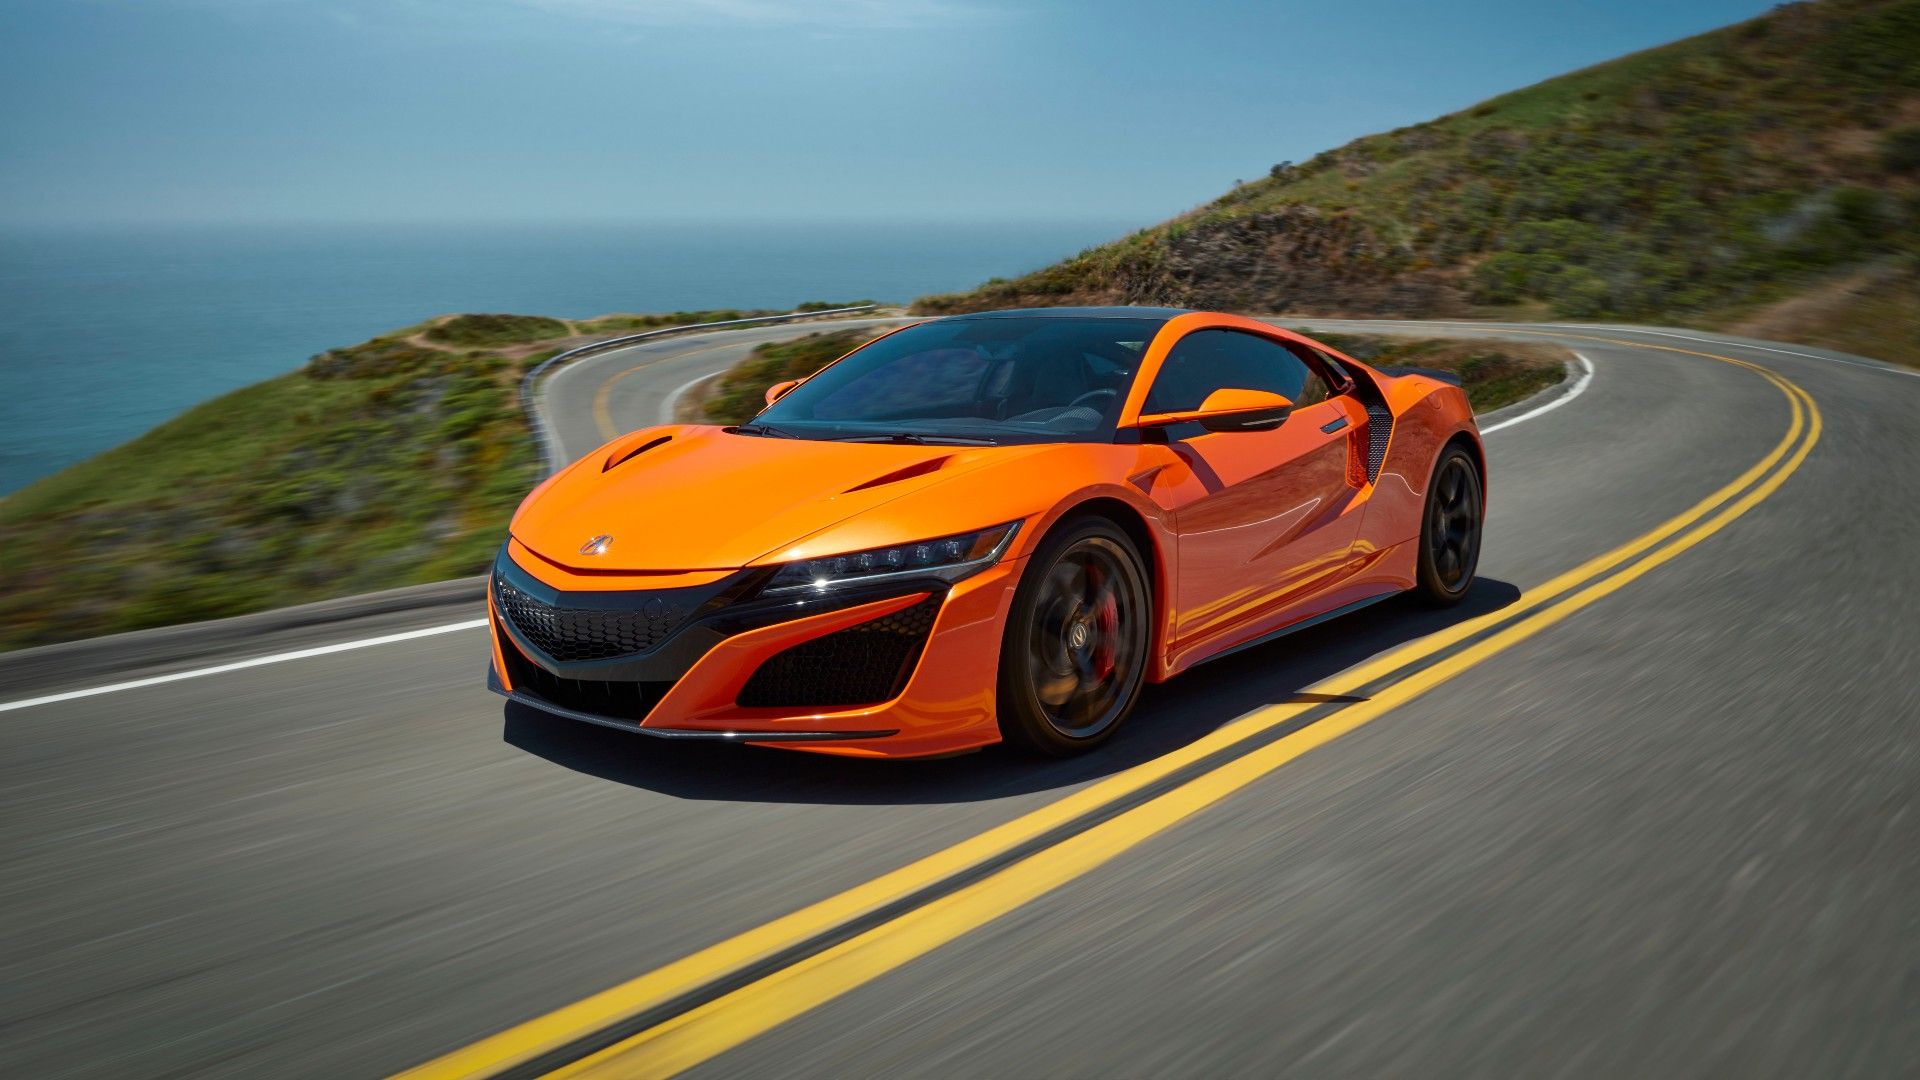 Front 3/4 shot of a 2019 Acura NSX cruising